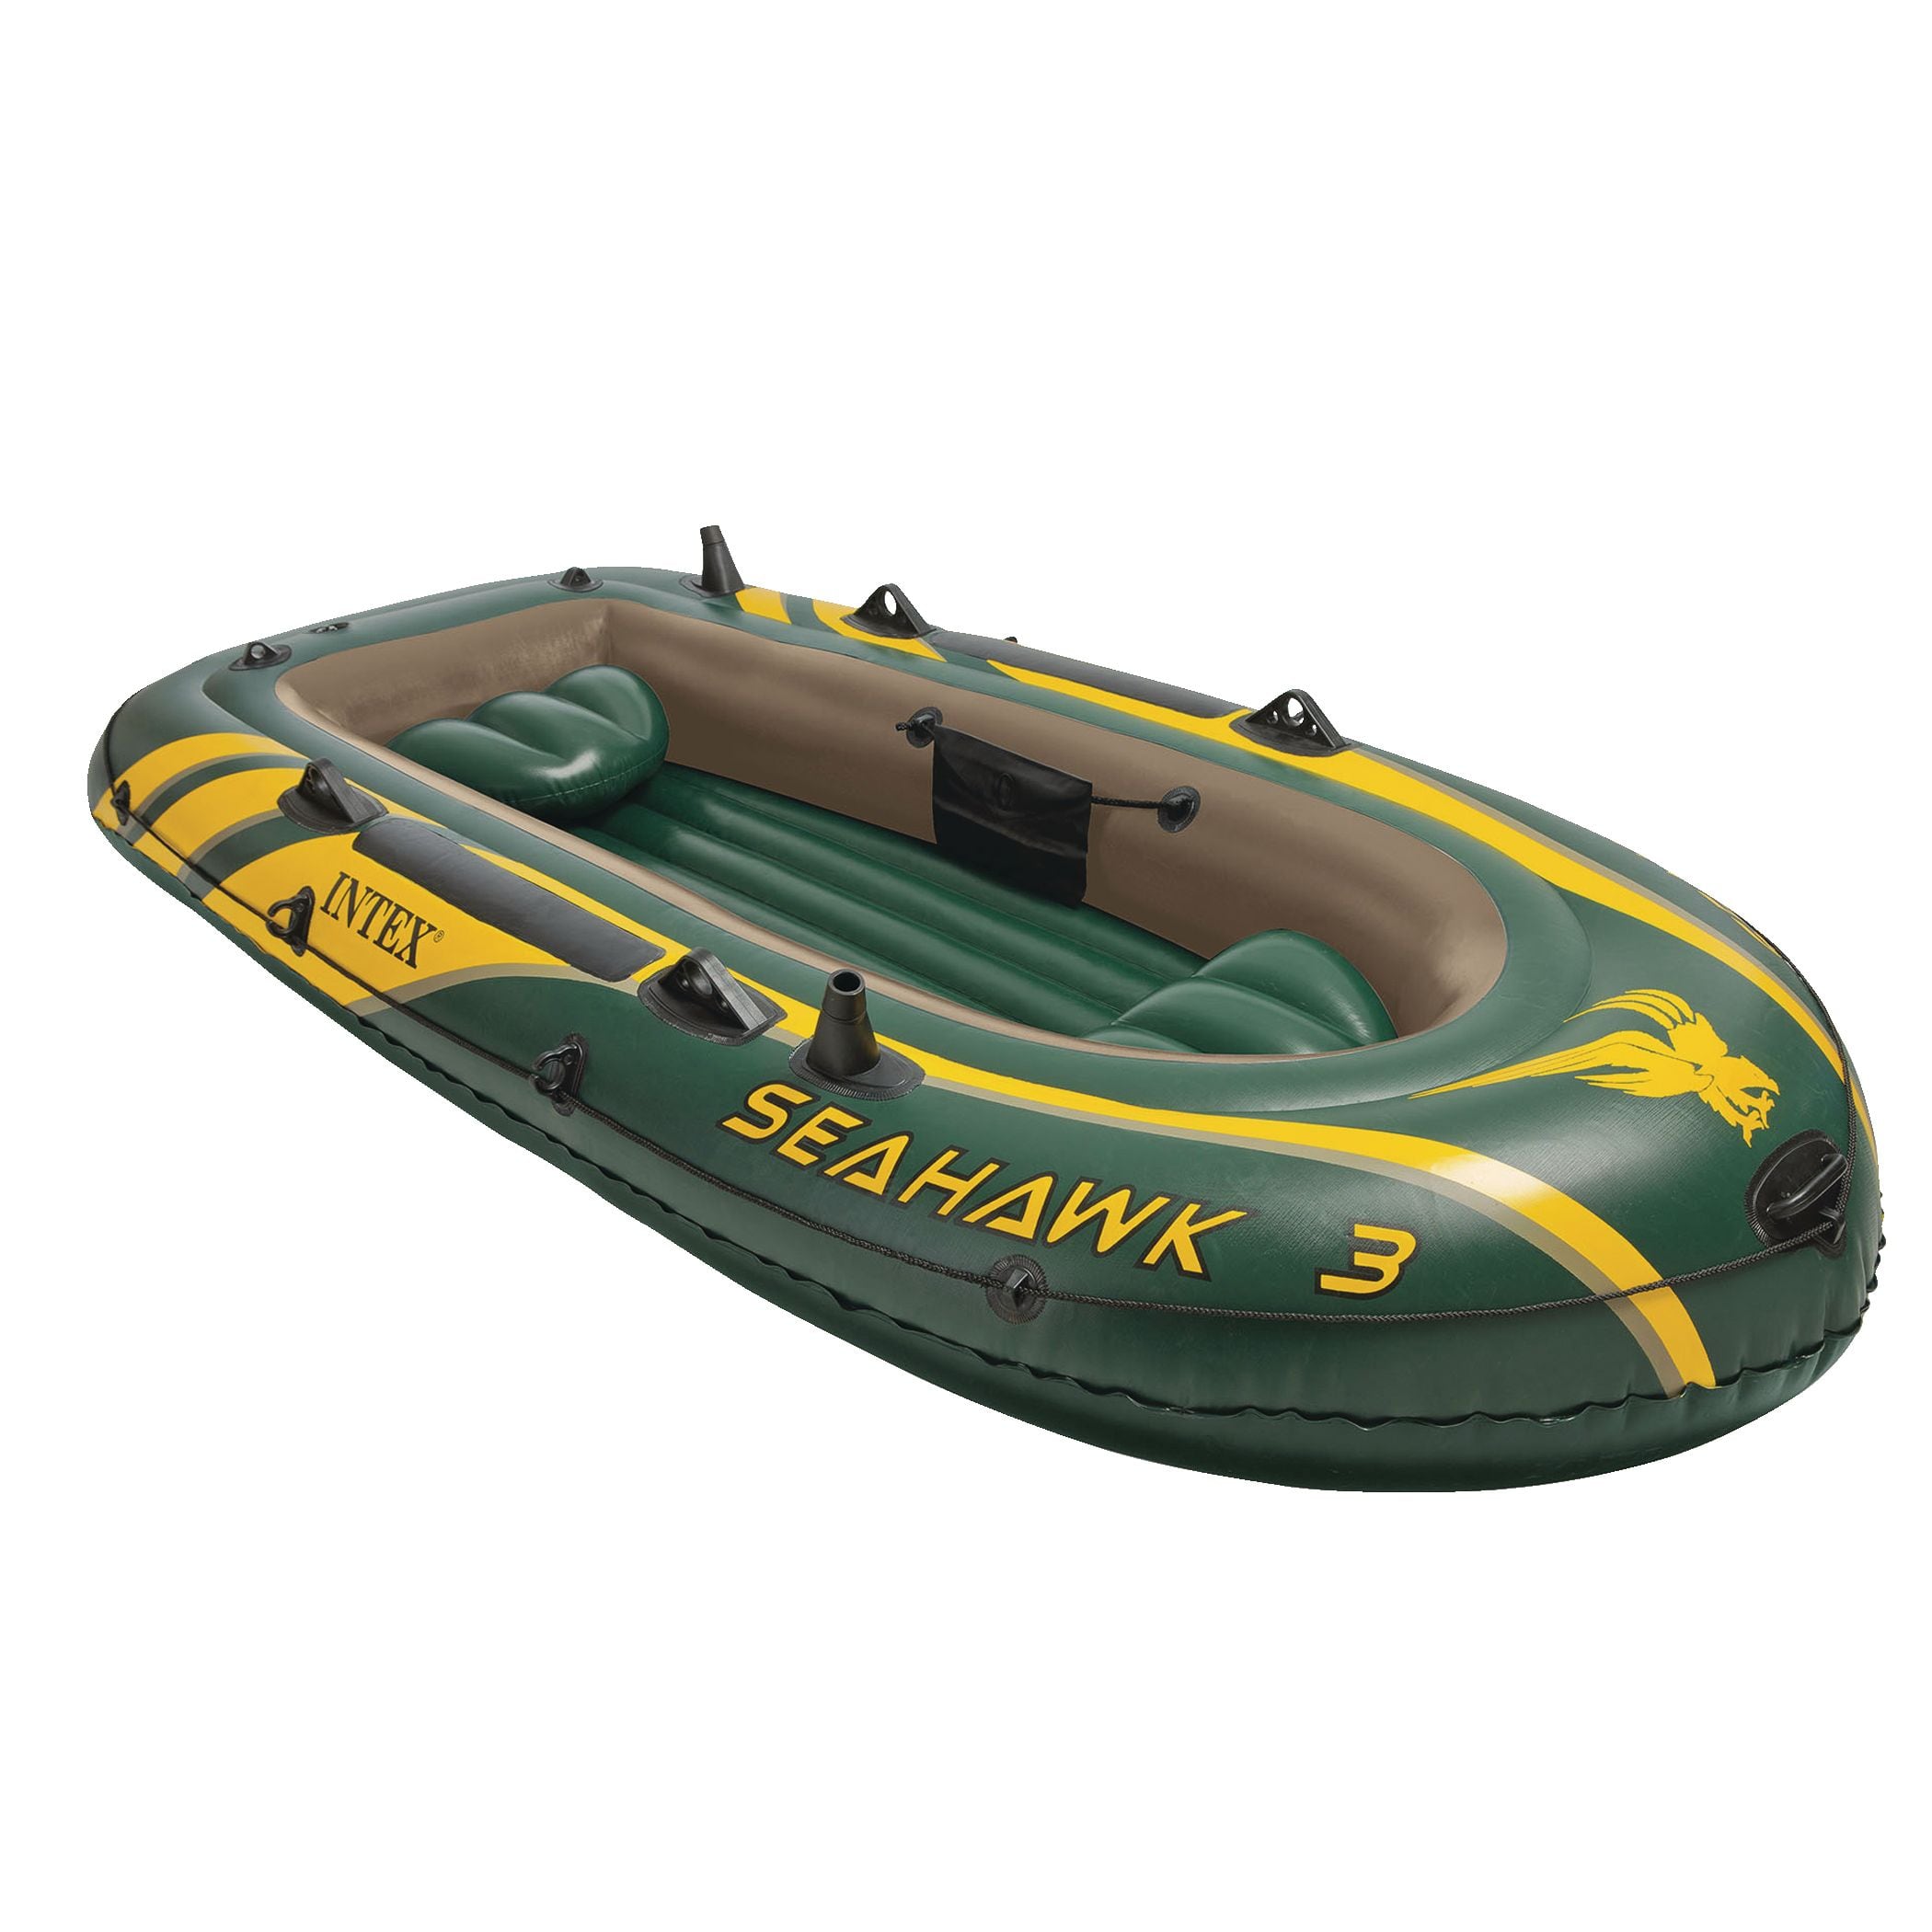 Intex Seahawk 3-Person Inflatable Boat